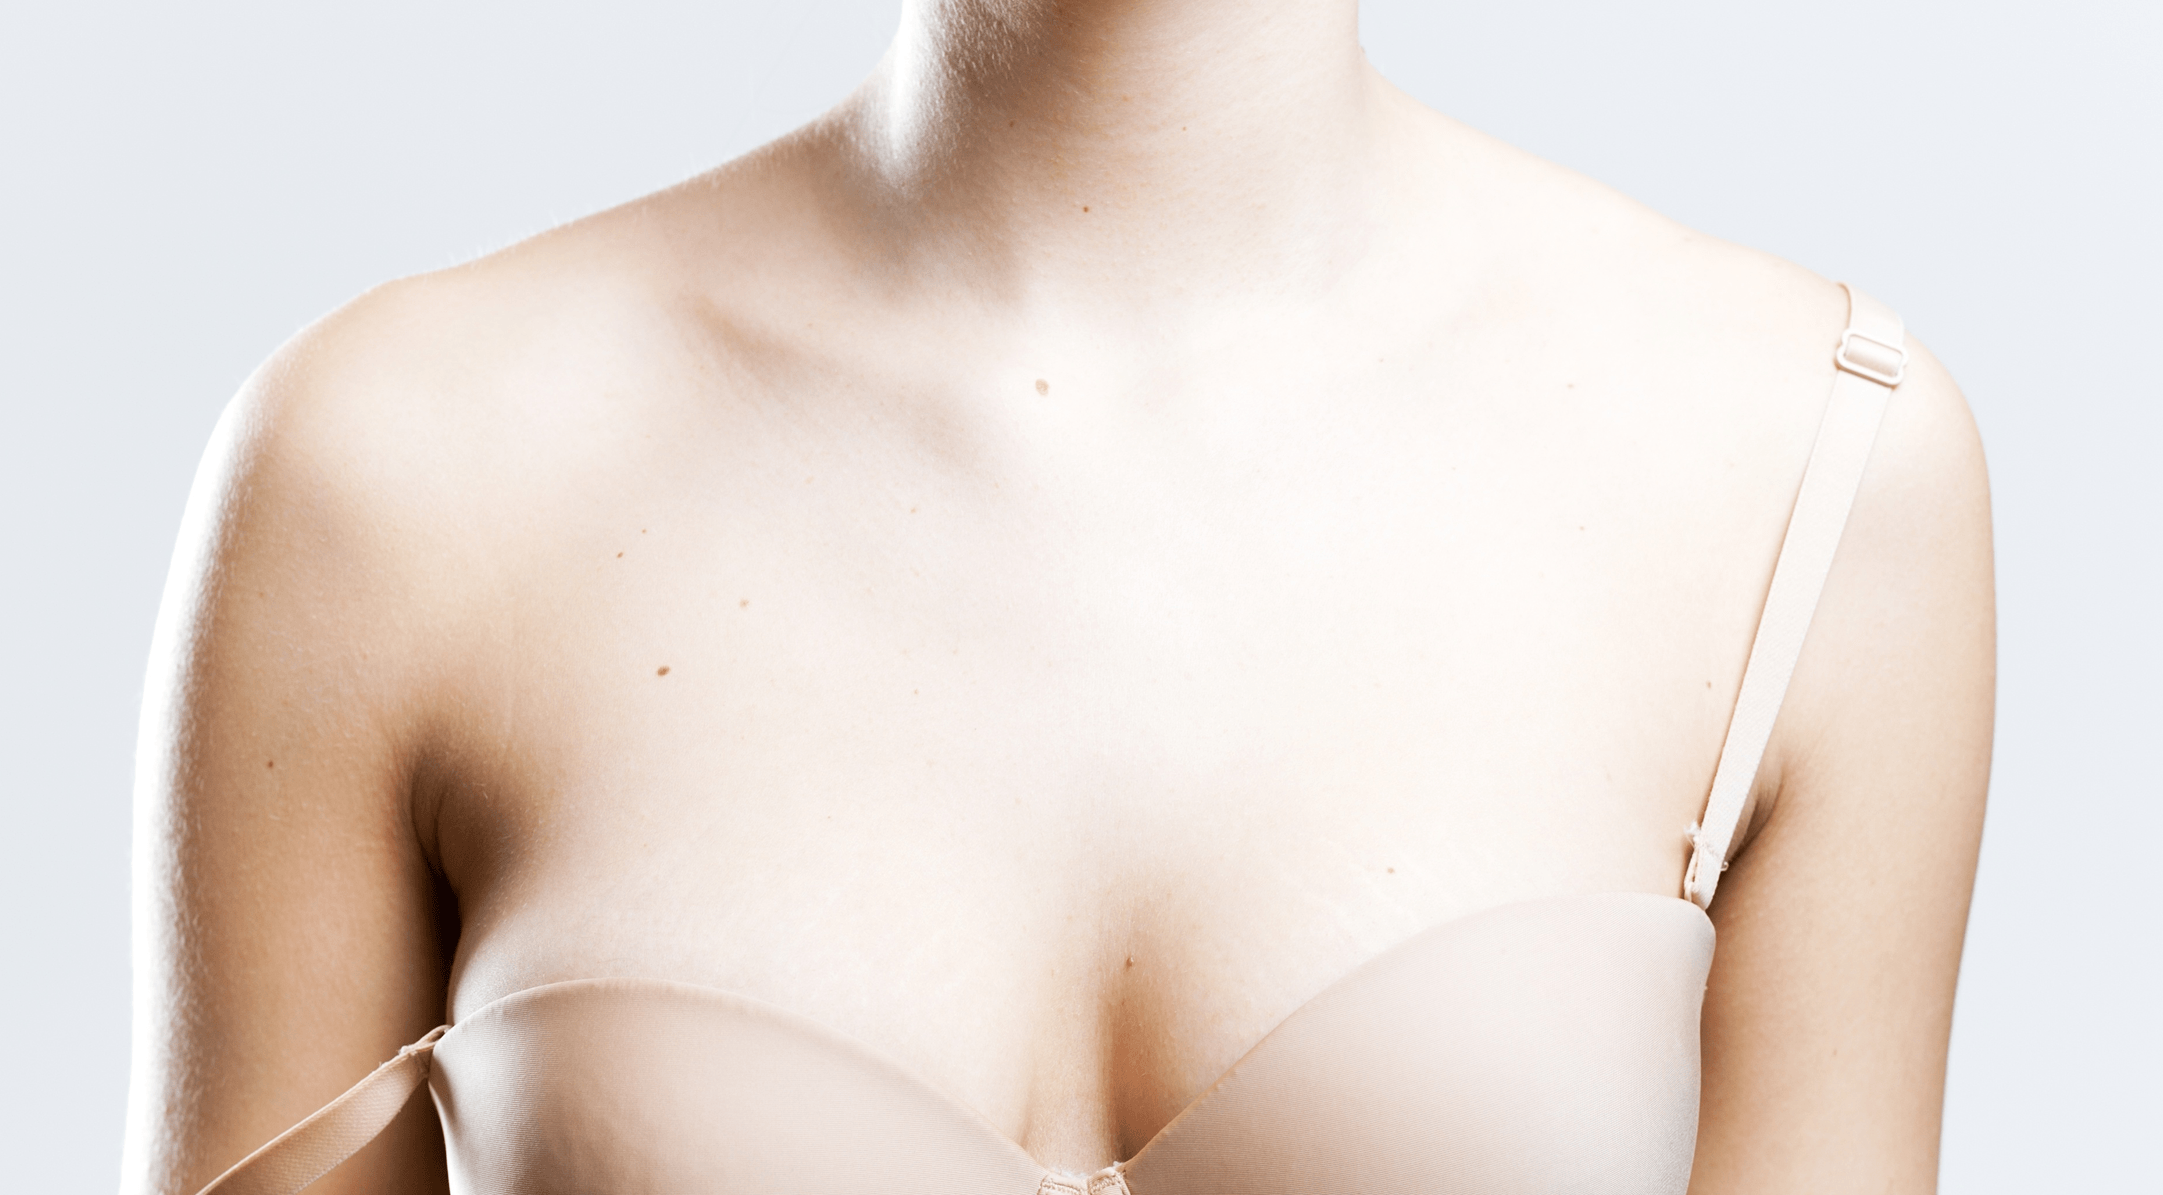 Small Cup Large Band Bras: Still an Underserved Market? - The Breast Life